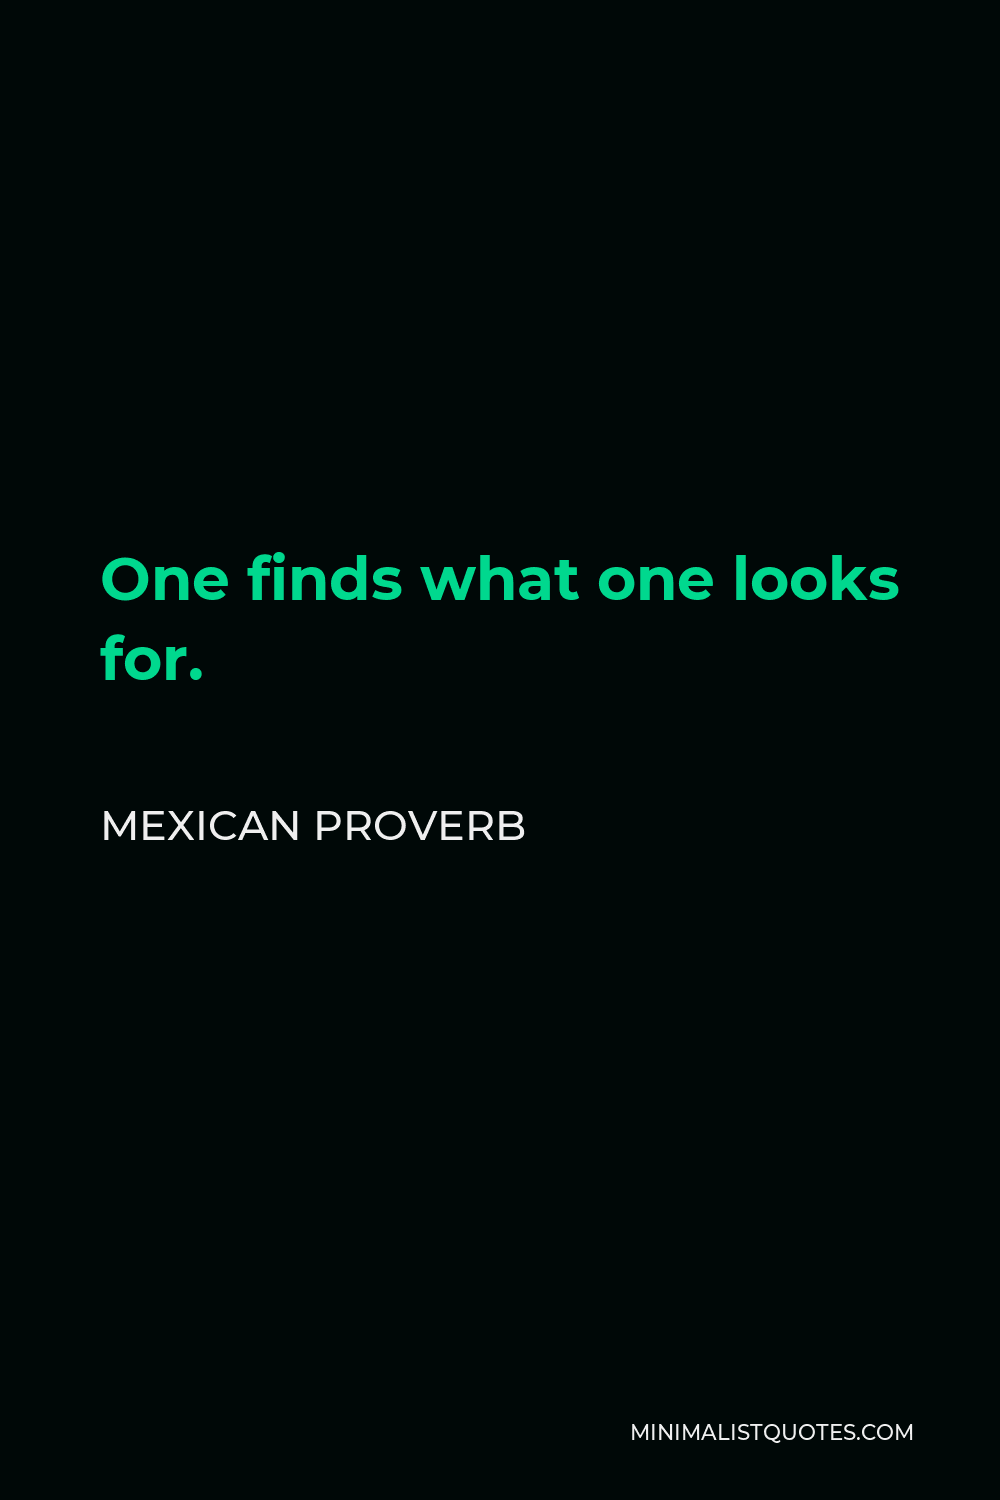 Mexican Proverb Quote - One finds what one looks for.